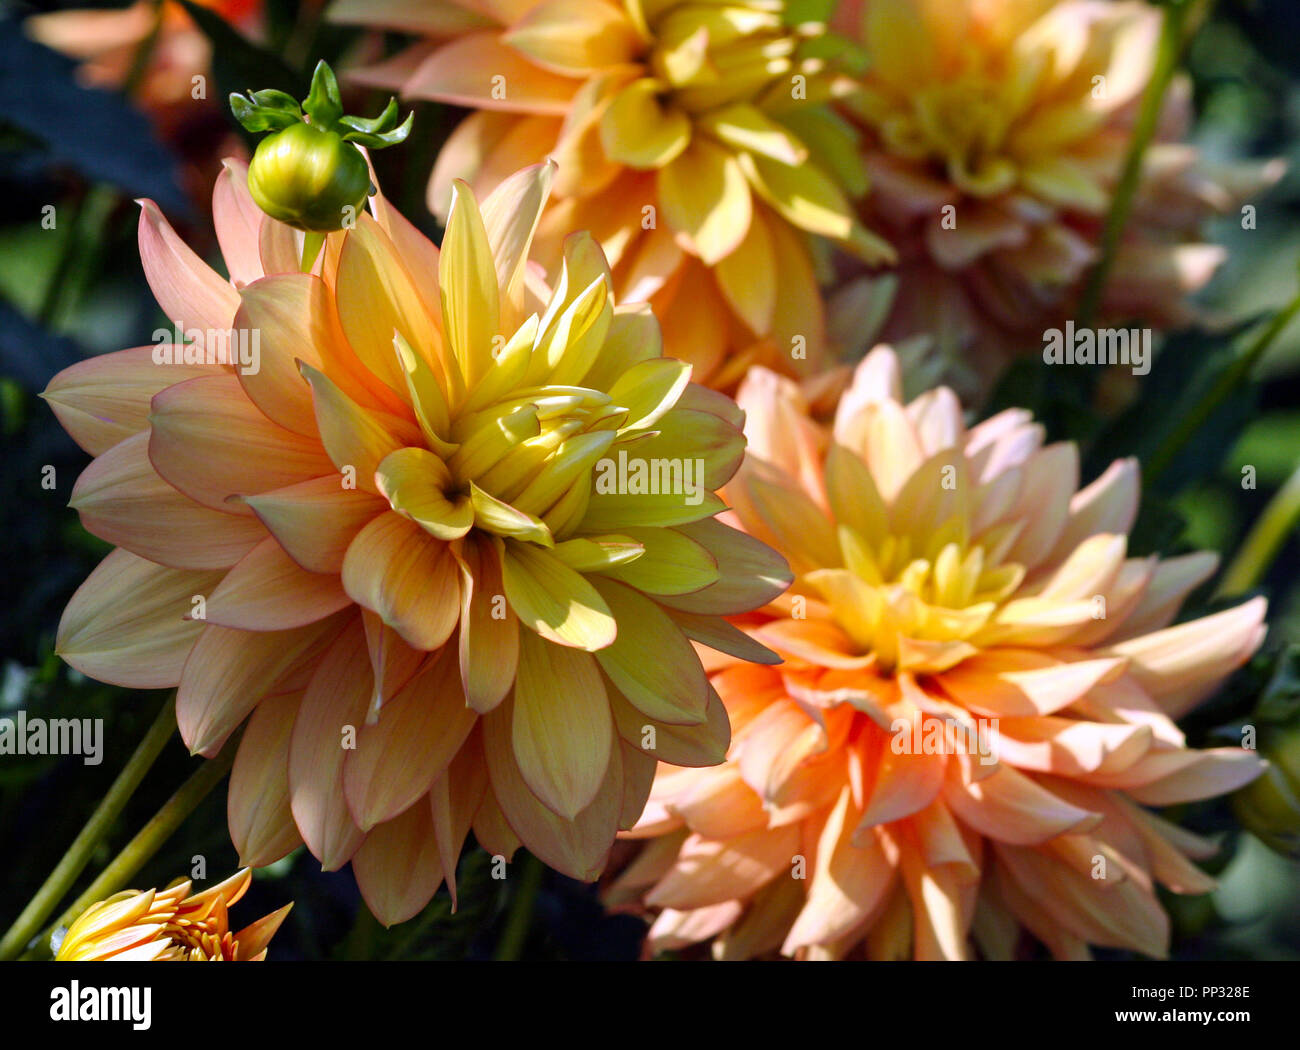 candlelight dahlia variety of chrysanthemum, one flower in close-up, orange bright petals smoothly turning into the golden core of the plant, a sunny Stock Photo